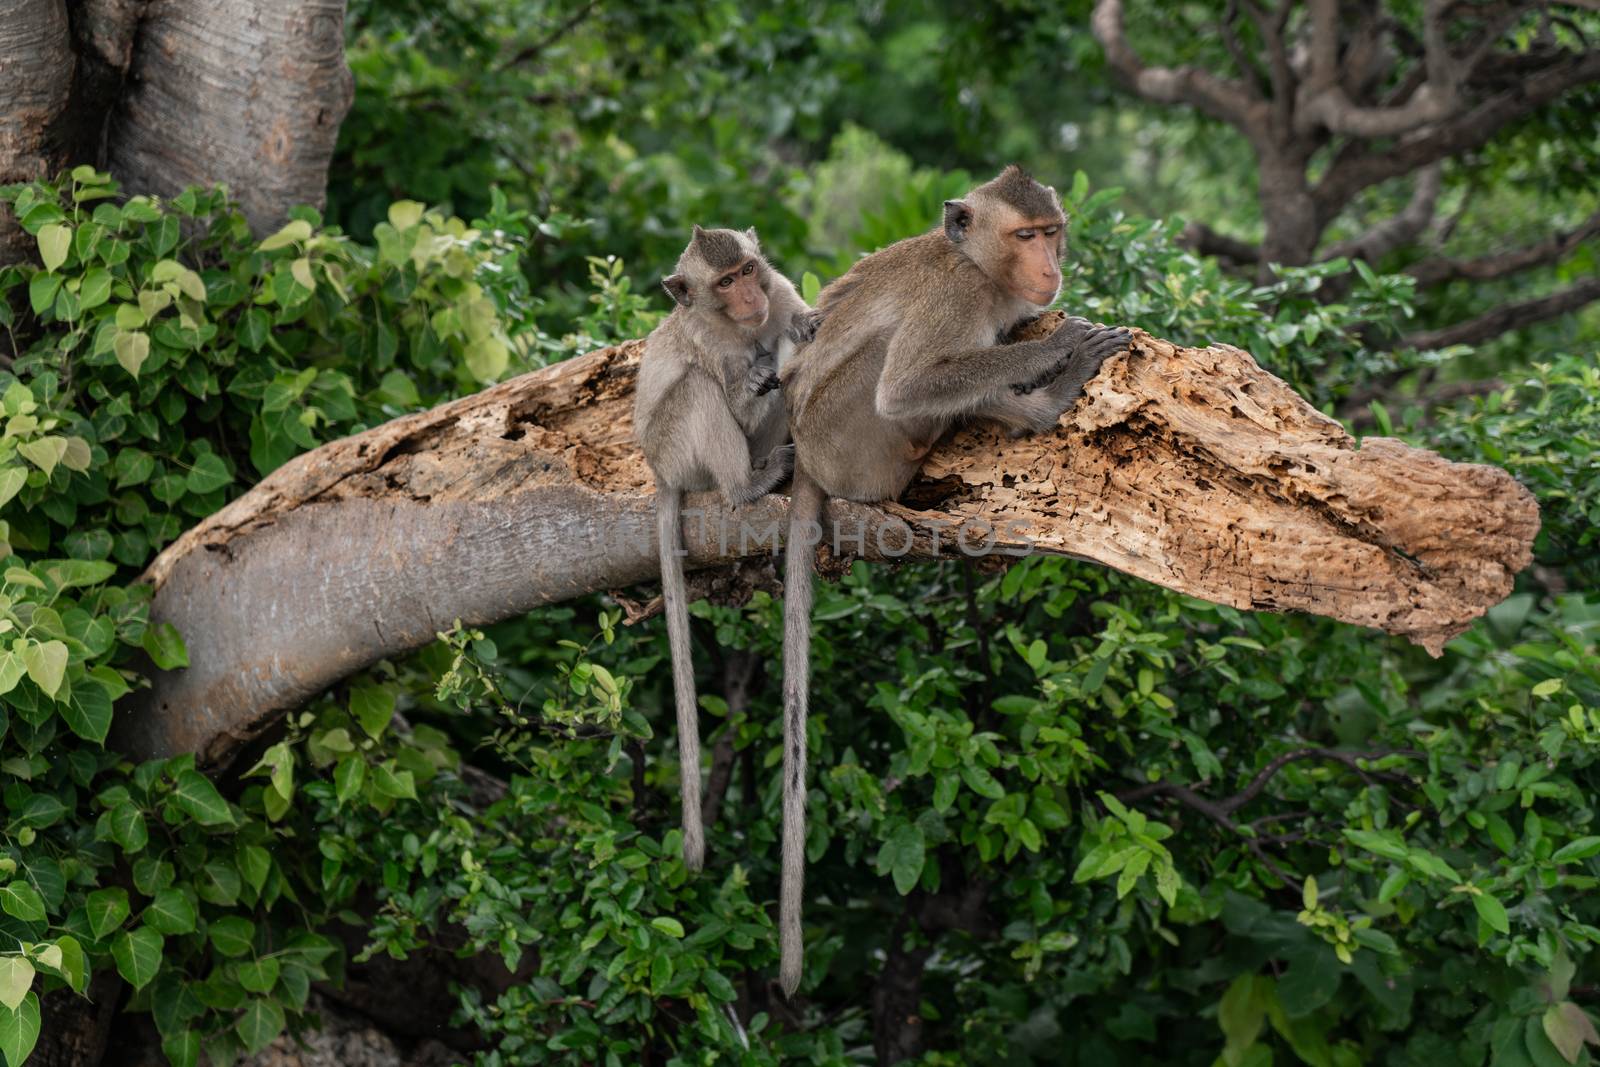 Monkey family on the tree in the forest by Buttus_casso